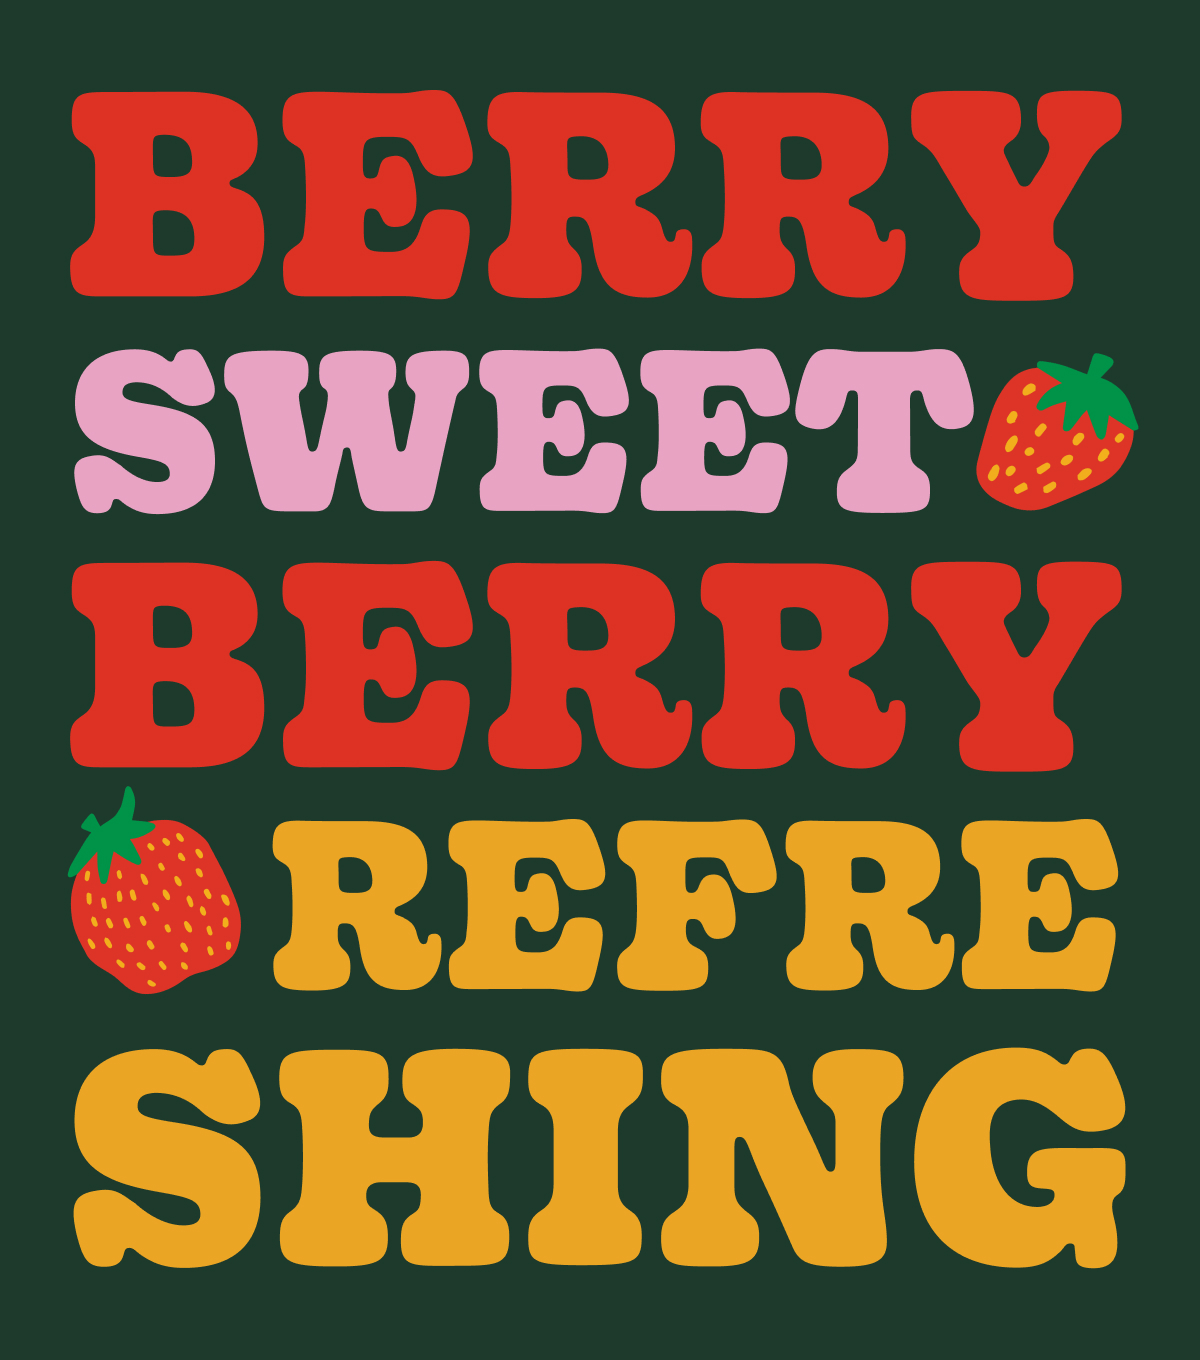 Black background with colorful font that says Berry Sweet Berry Refreshing. Words are in red, pink, and yellow. Two graphic strawberries are on the image as well.